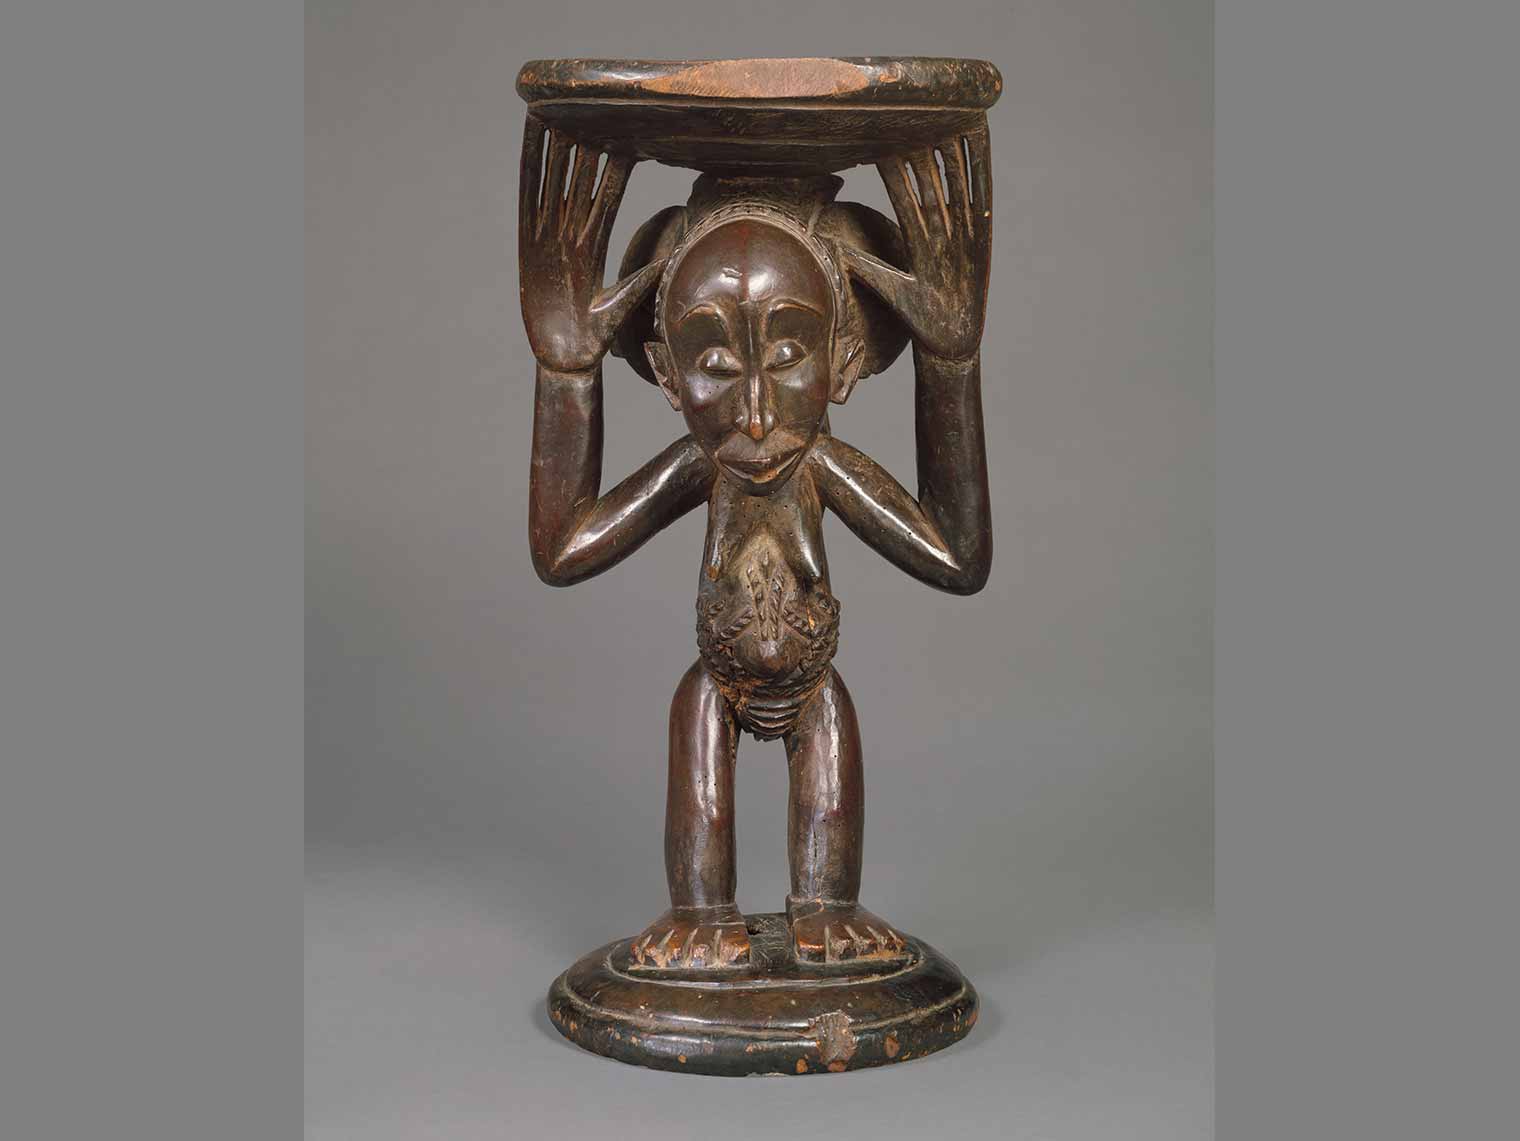 A brown, wooden female body holding the seat of a stool.